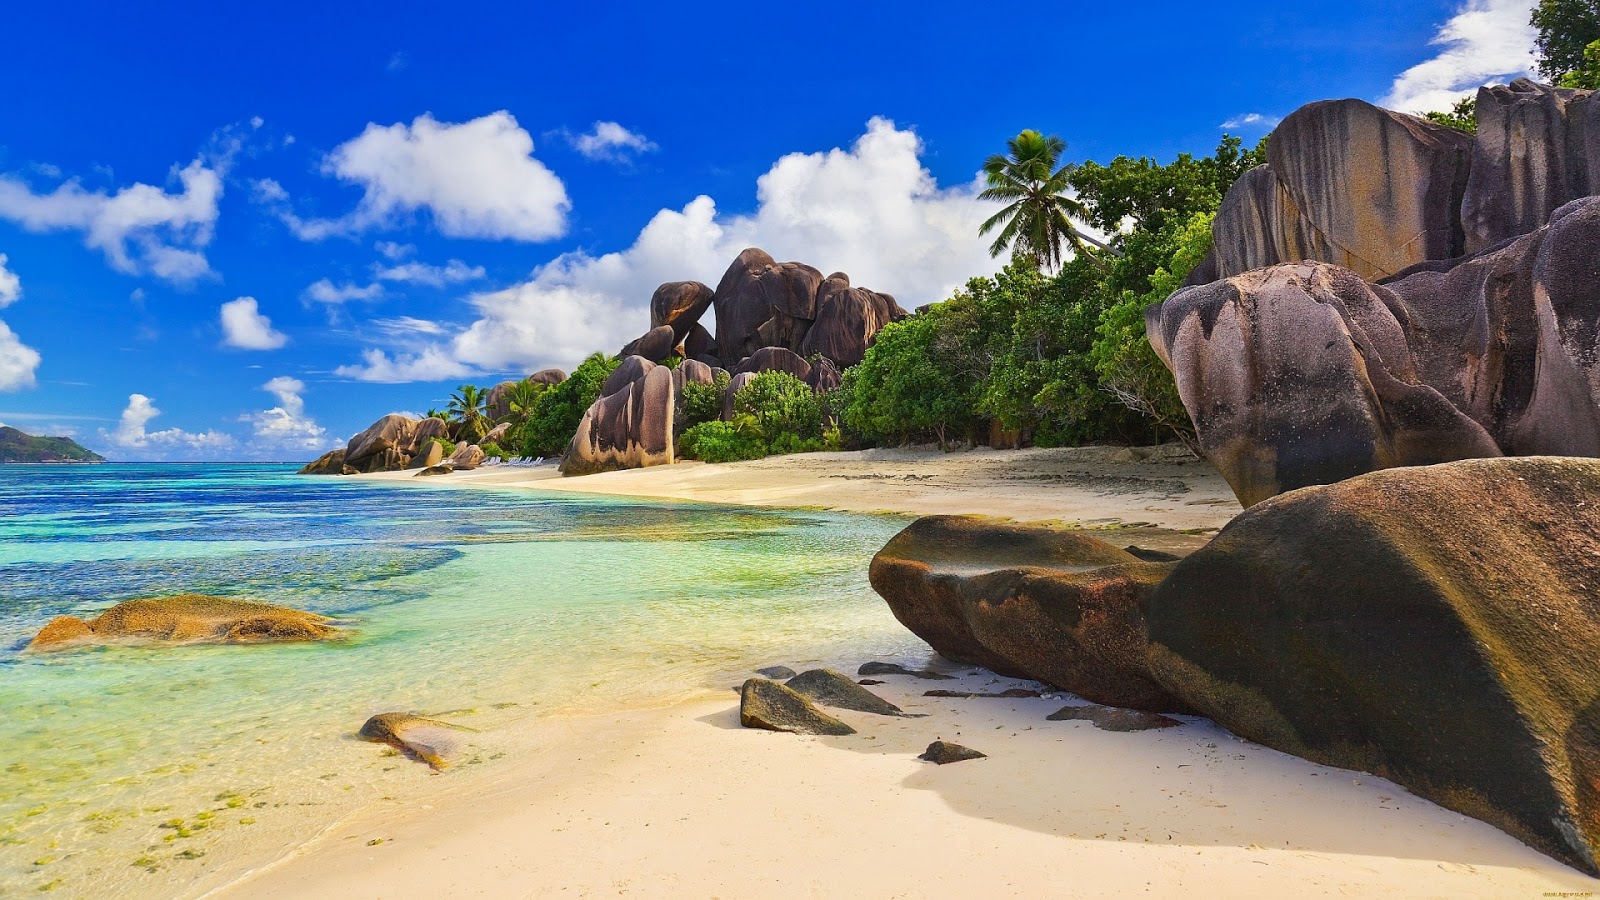 Beautiful Wallpapers: Pictures Of Beautiful Beaches In The World